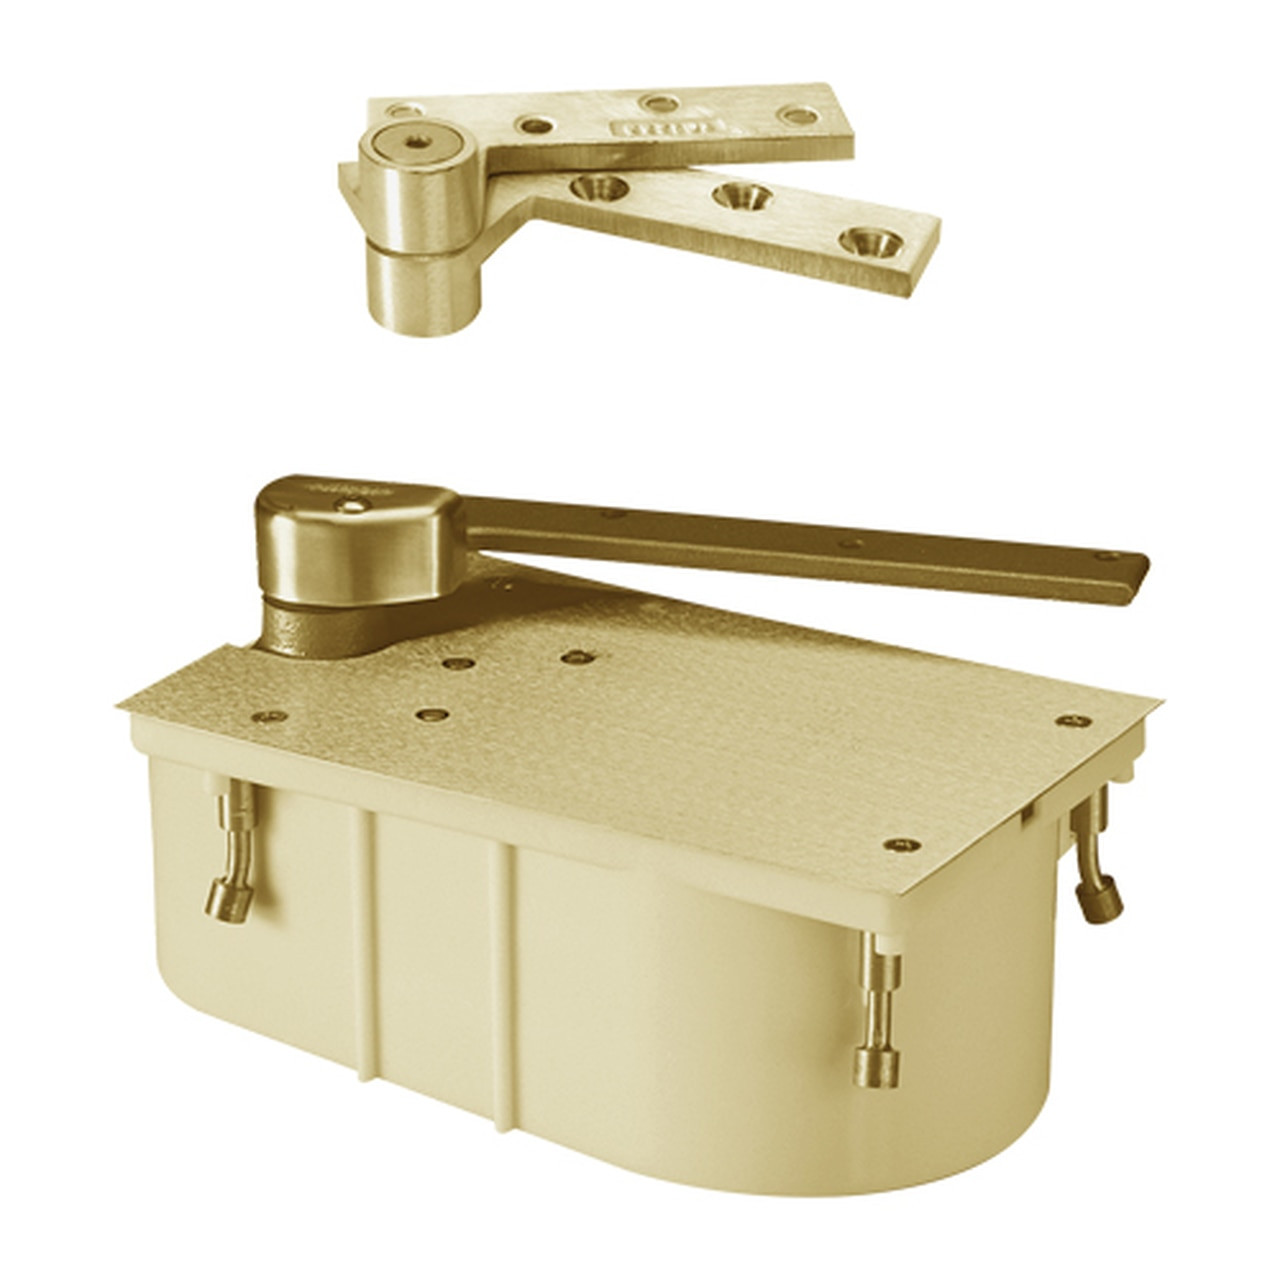 F27-85N-LFP-CWF-LH-606 Rixson 27 Series Fire Rated Heavy Duty 3/4" Offset Hung Floor Closer in Satin Brass Finish